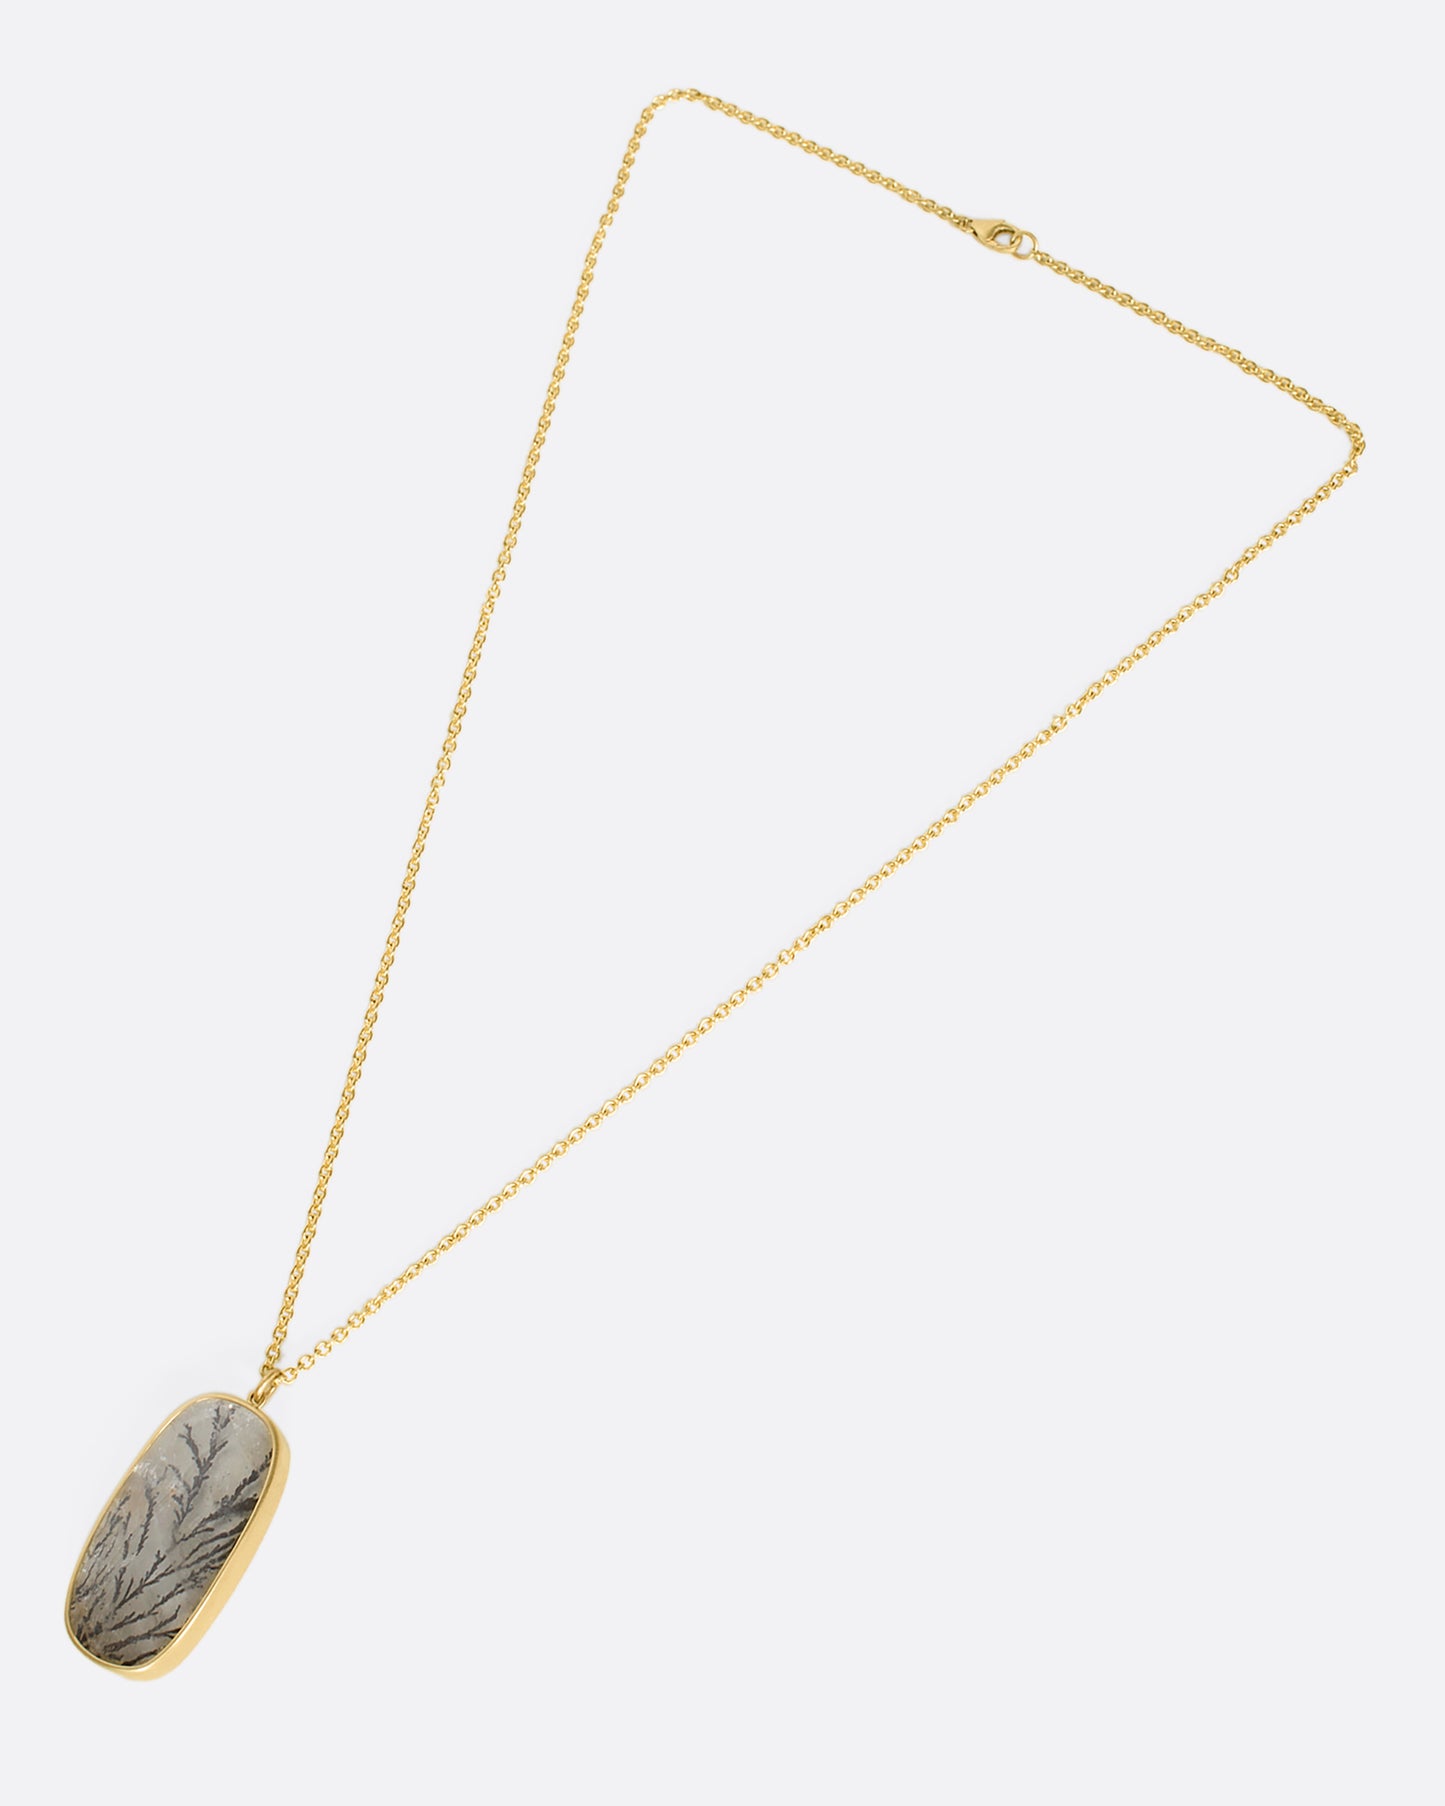 An overhead view of a dendritic quartz pendant on a yellow gold chain laying down flat.